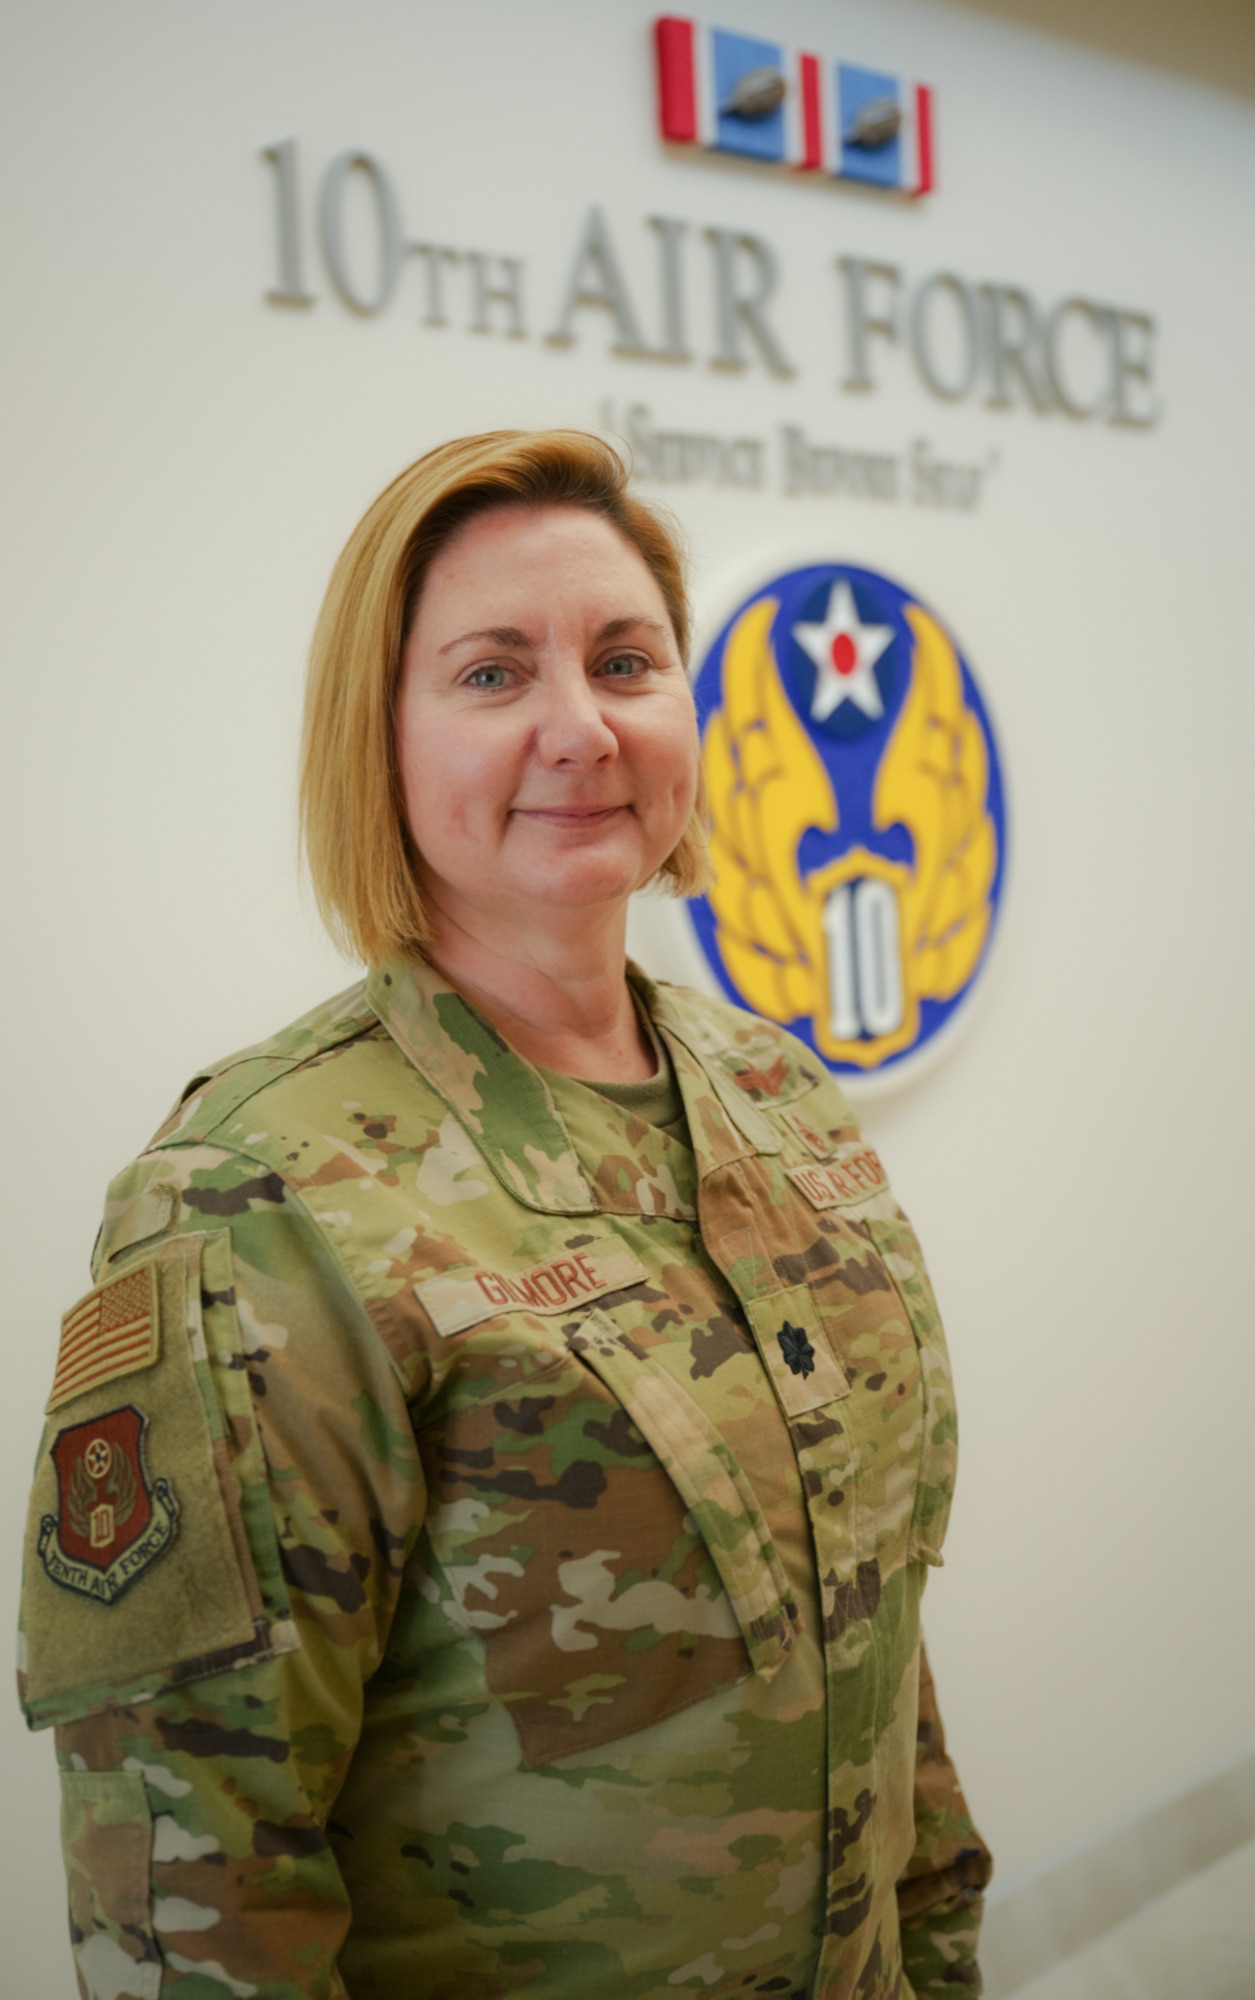 U.S. Air Force Lt. Col. Terri Gilmore, 10th Air Force surgeon general chief, health services administrator, poses for a photo, July 15, 2022, Naval Air Station, Joint Reserve Base Fort Worth, Texas. Gilmore, who has more than 20 years of military experience, is the first to serve in the new 10th AF role. (U.S. Air Force photo by Senior Master Sgt. Ted Daigle)